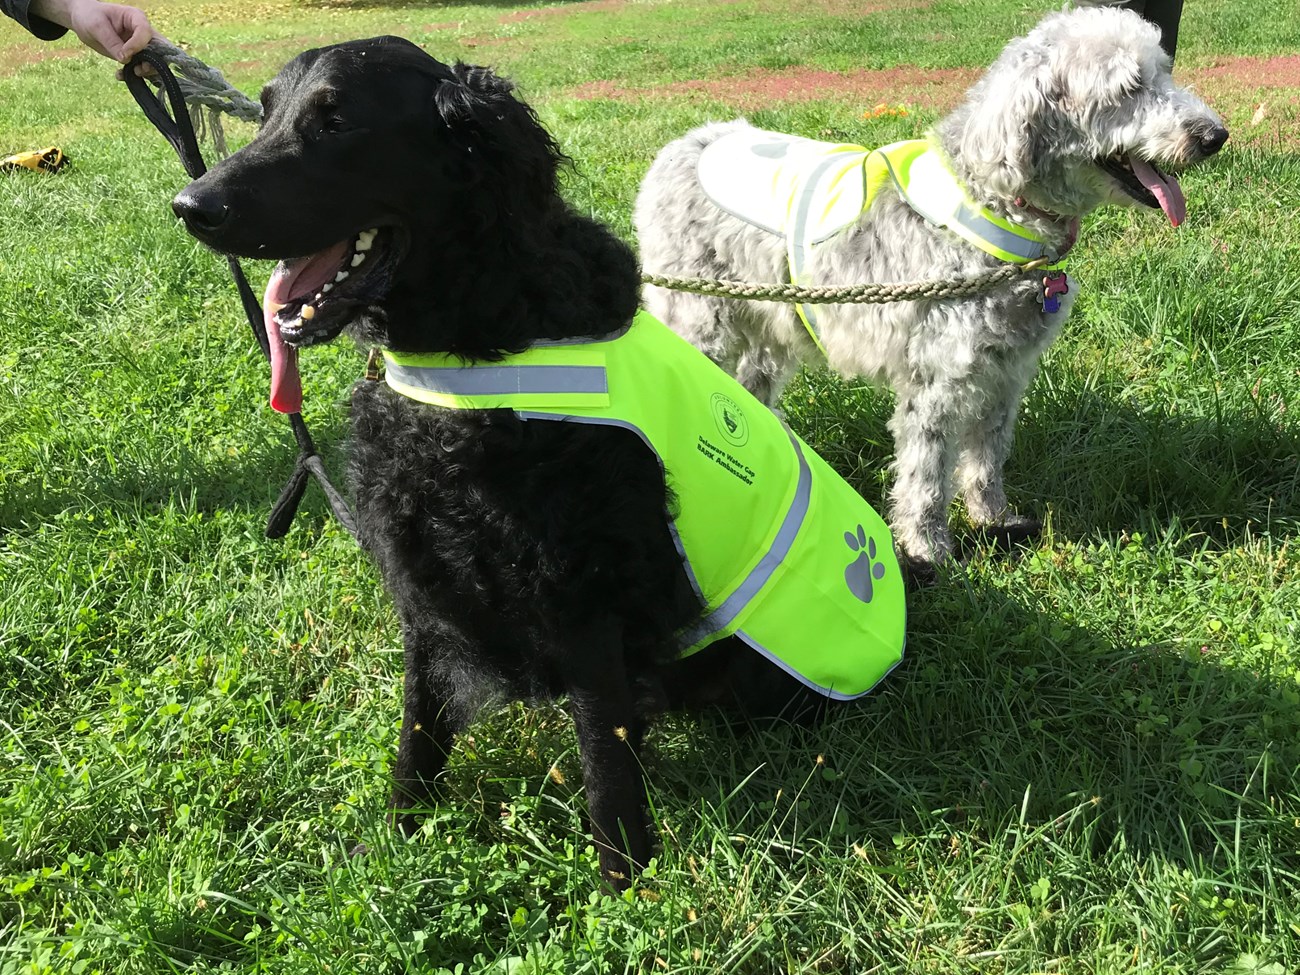 Two dogs next to each other with safety vests sitting on grass